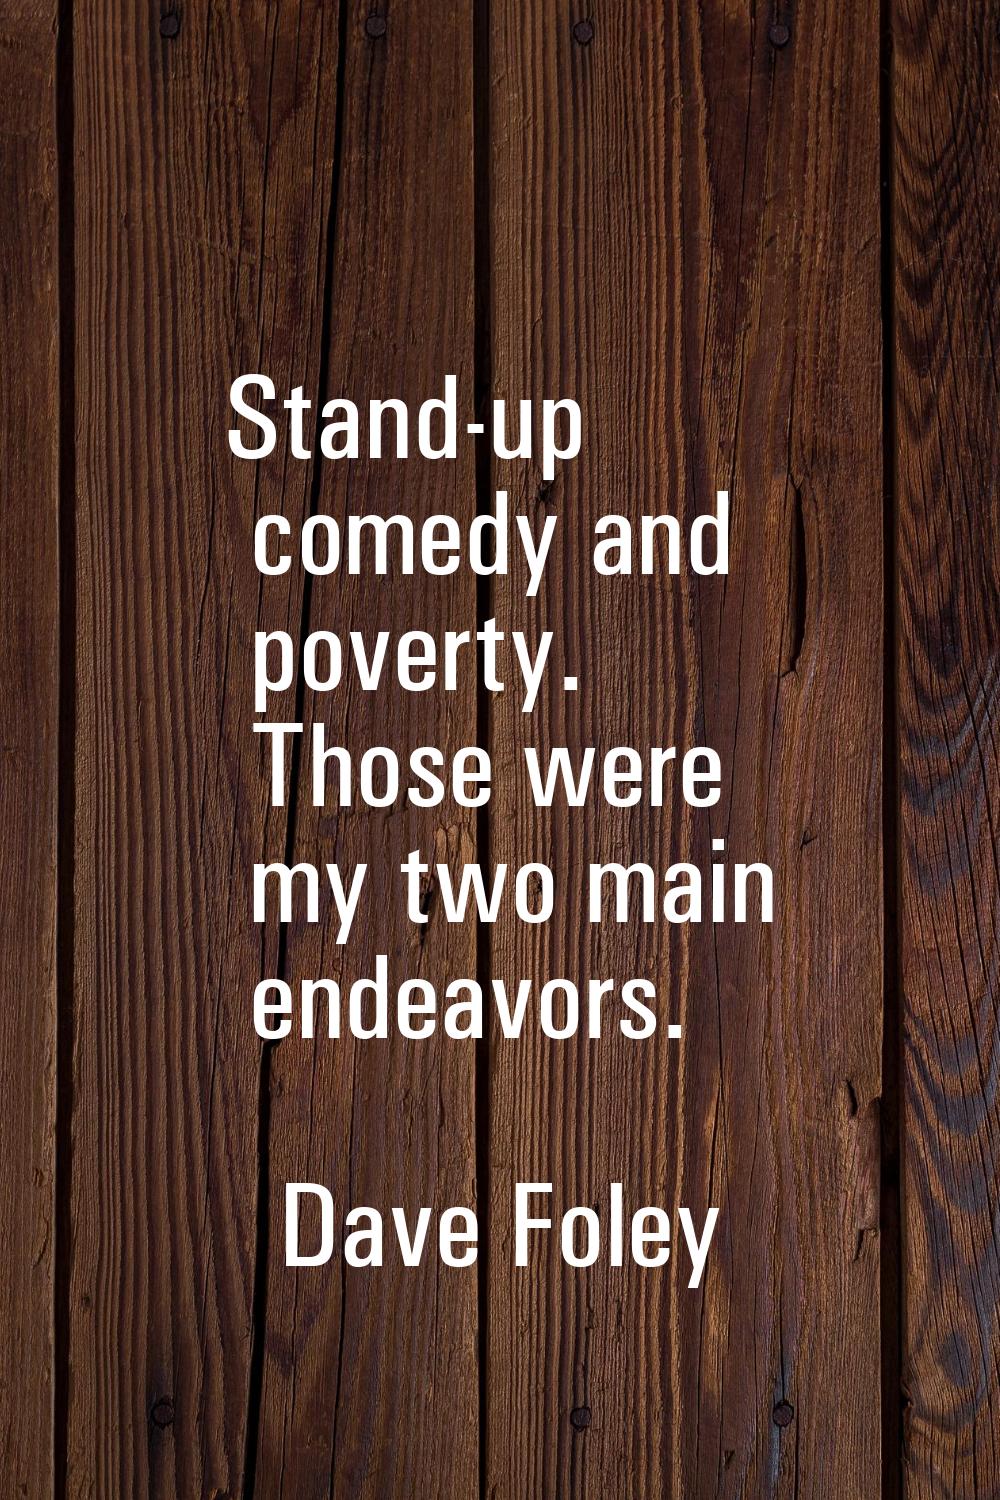 Stand-up comedy and poverty. Those were my two main endeavors.